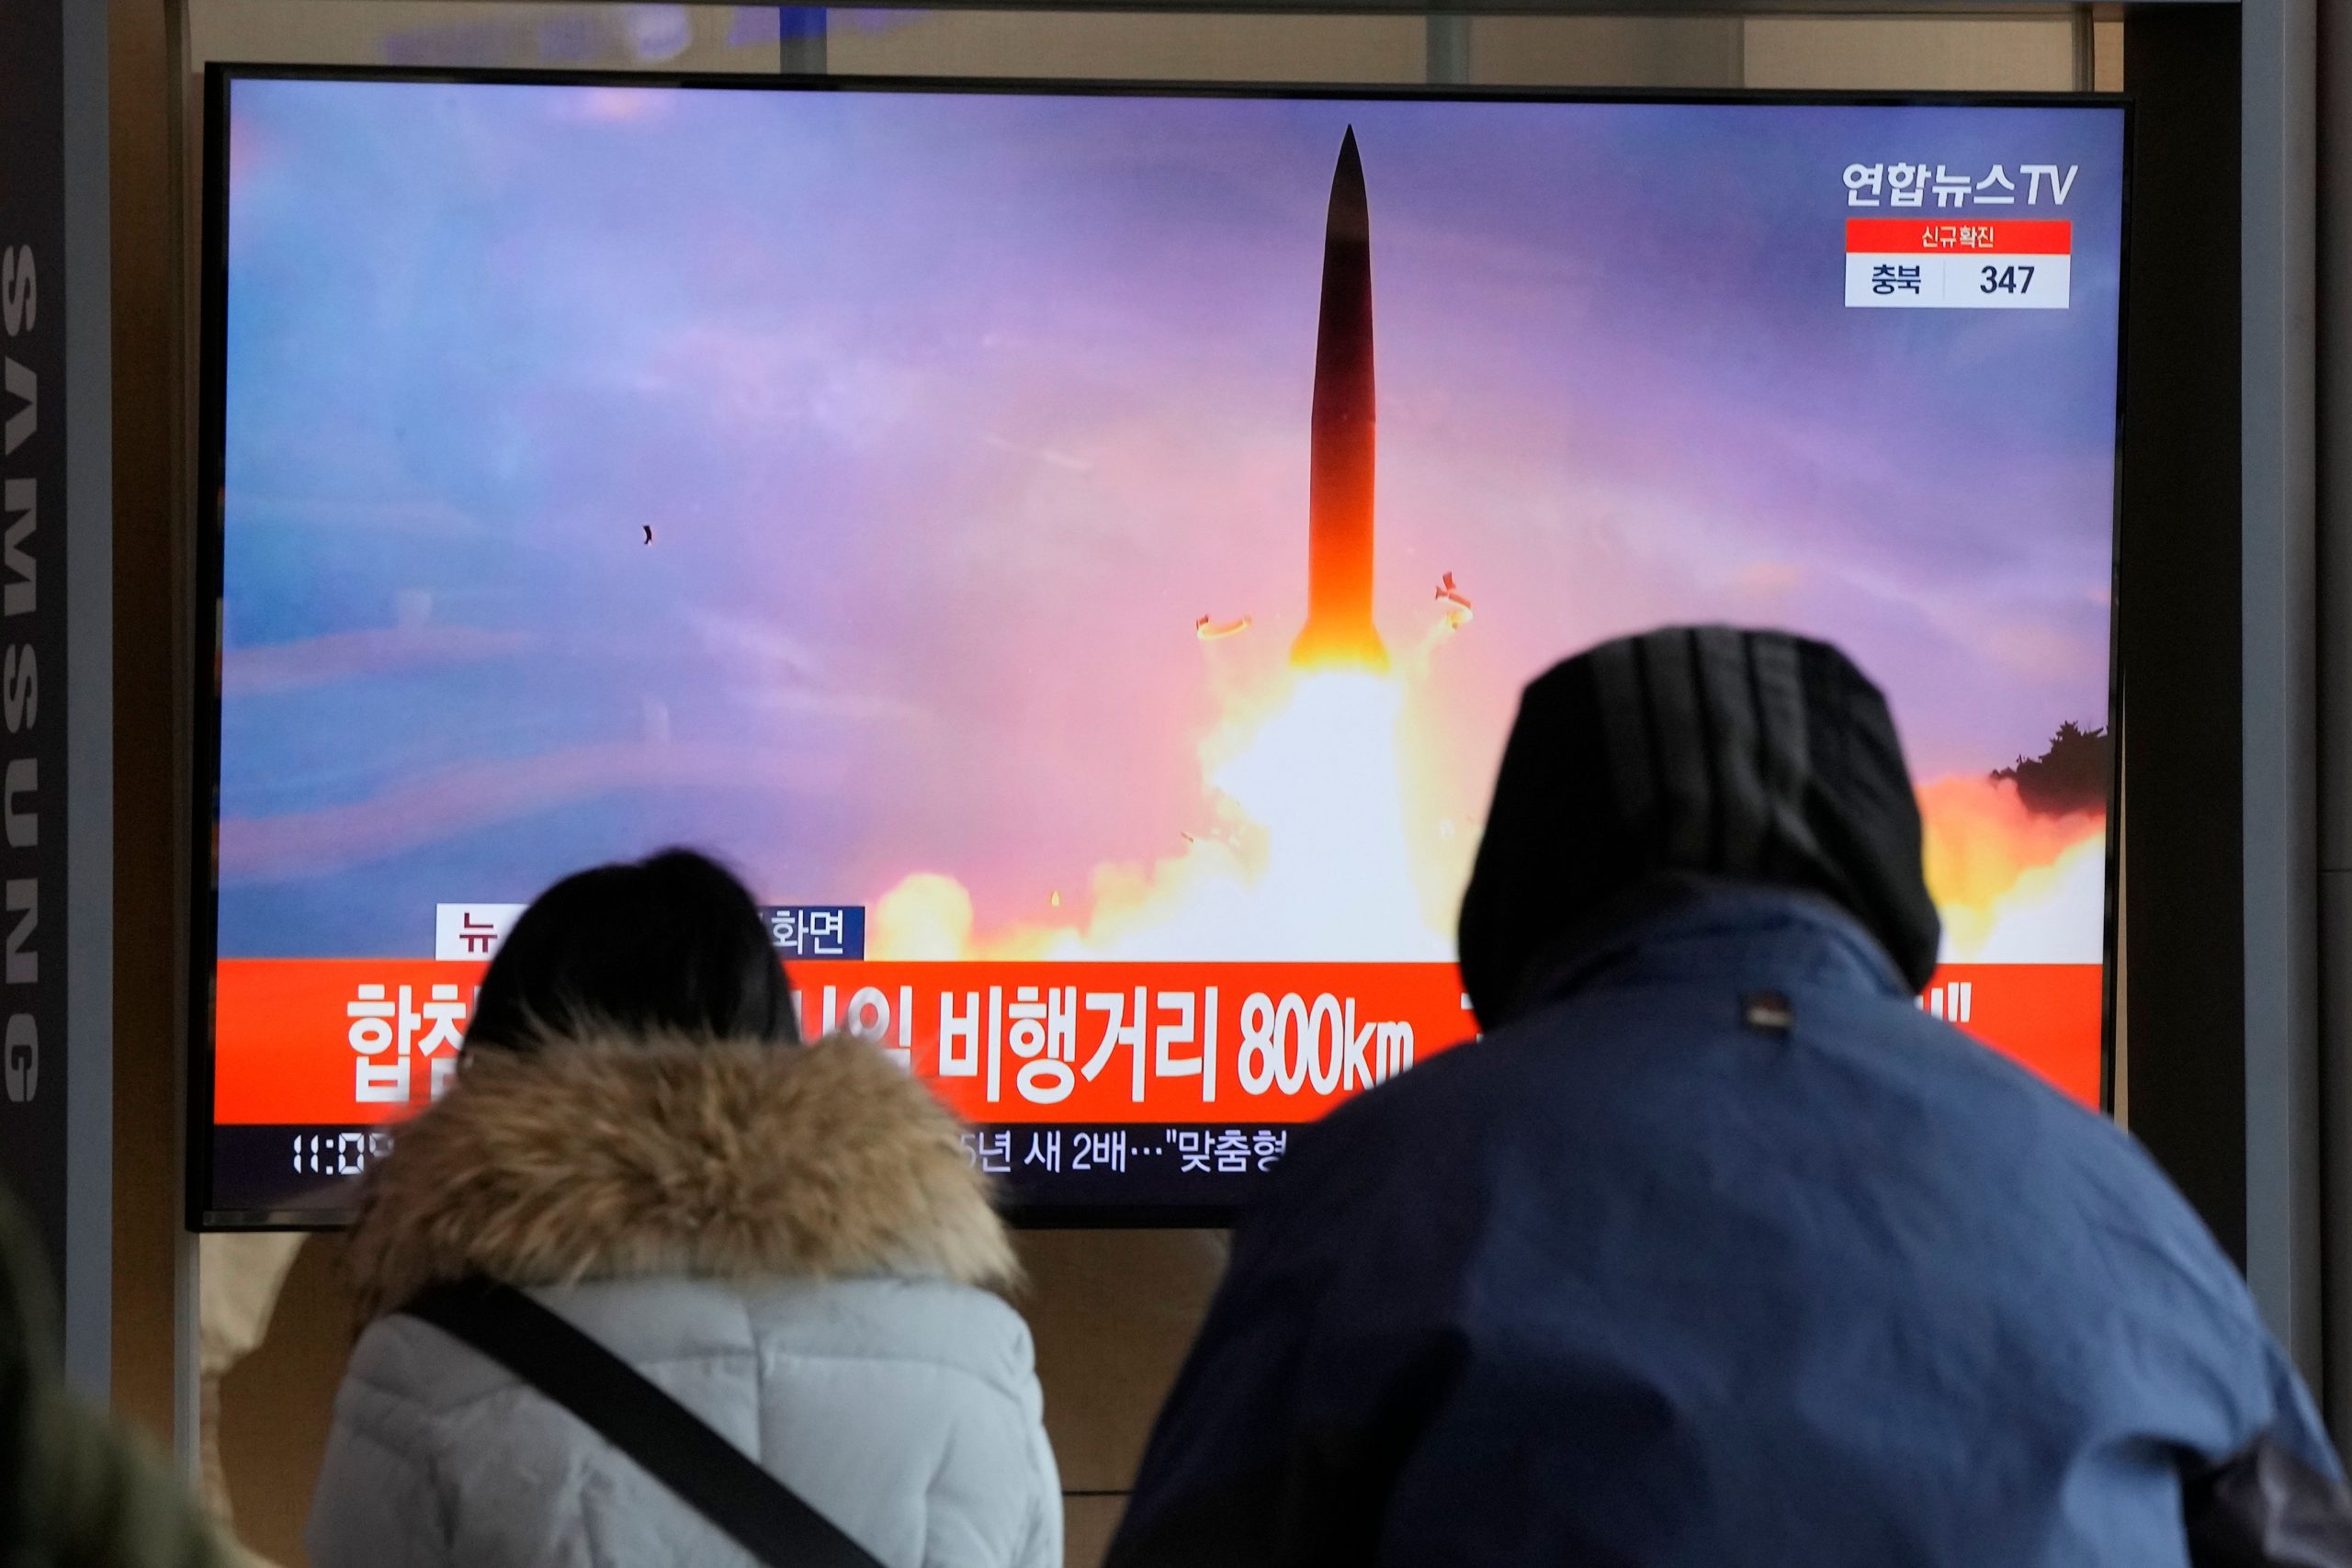 North Korea reportedly testing parts of missile that could strike US